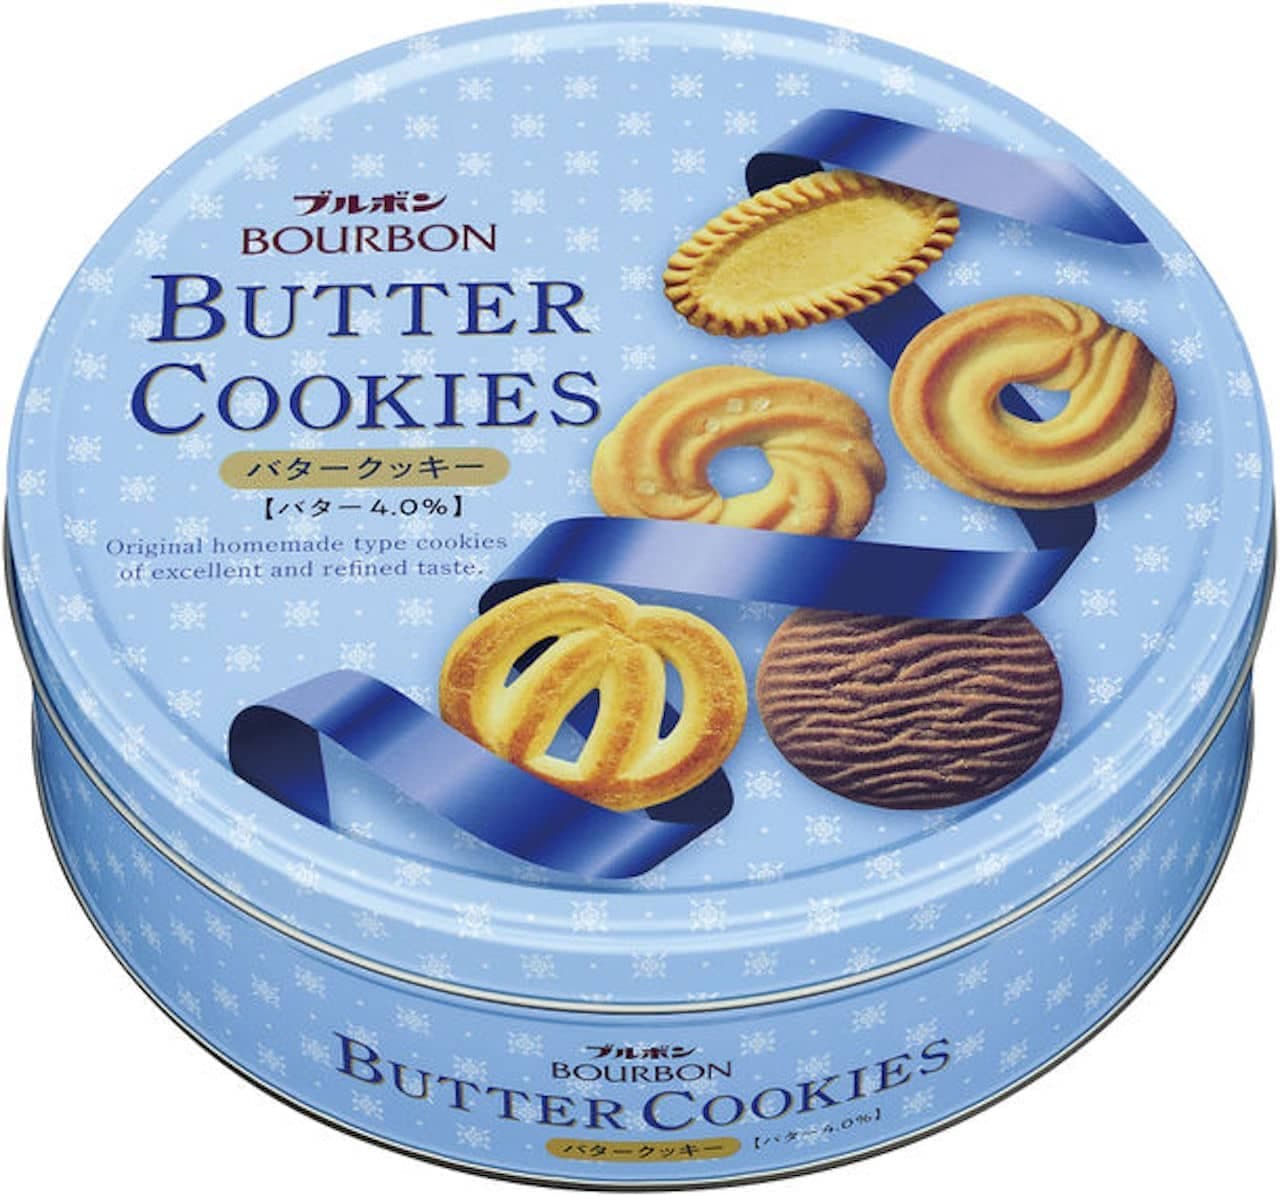 Bourbon "Butter Cookies in a Can